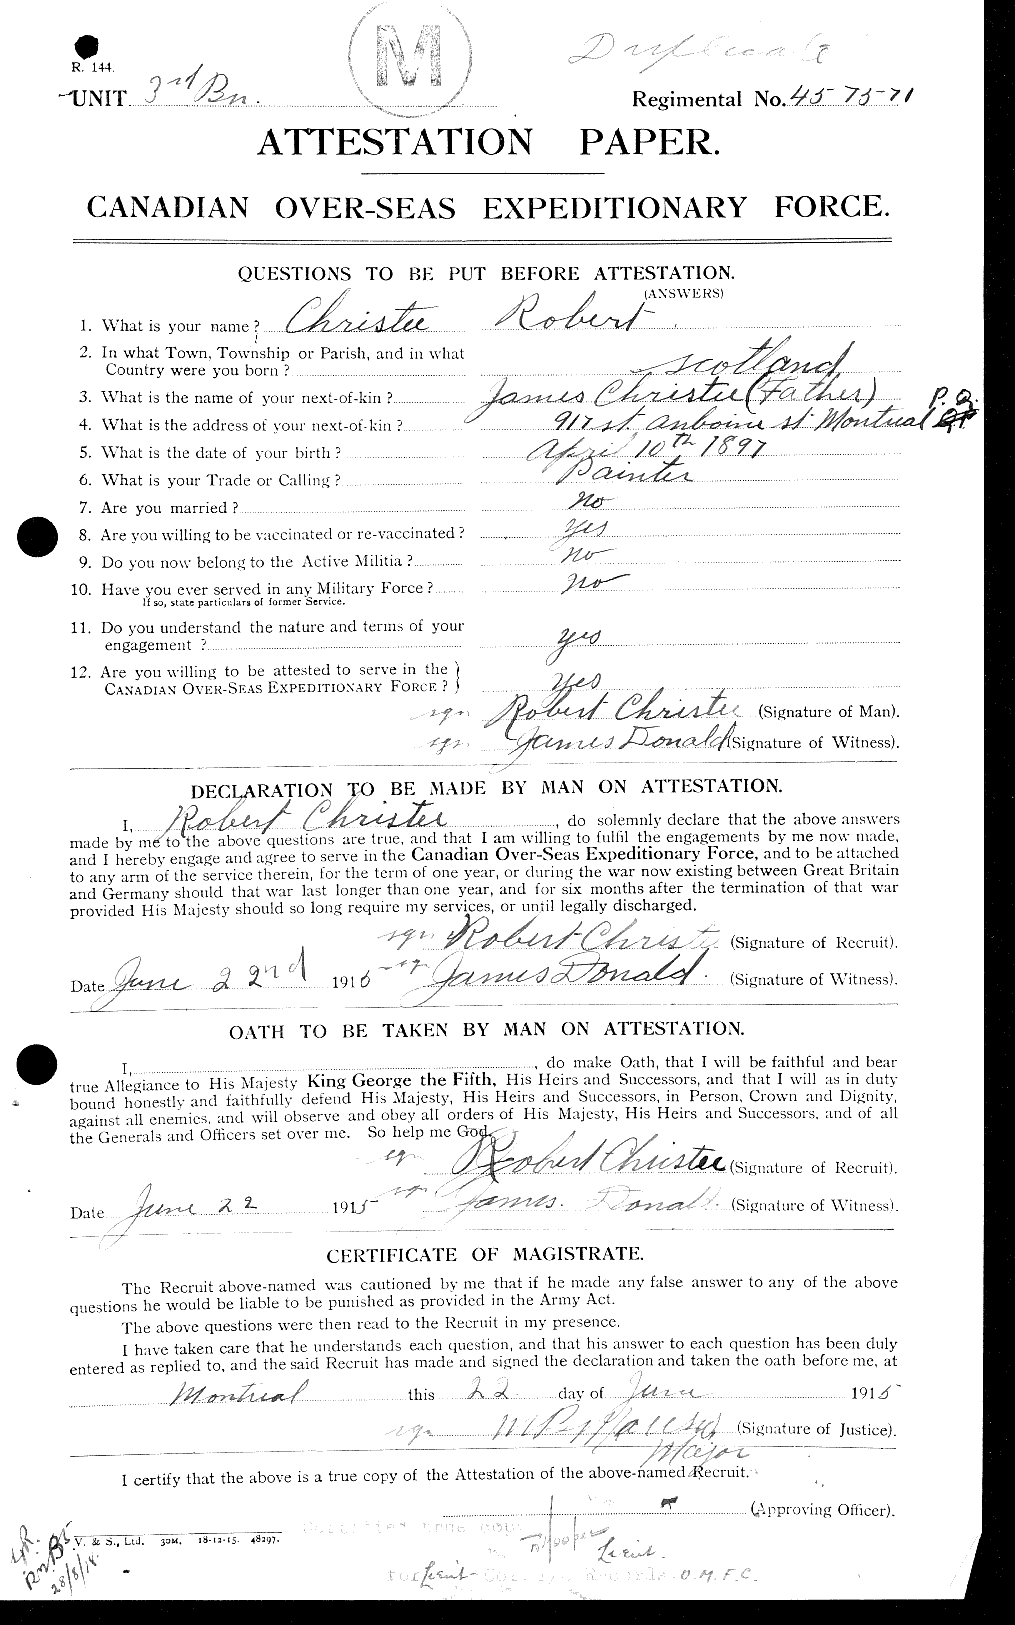 Personnel Records of the First World War - CEF 022052a